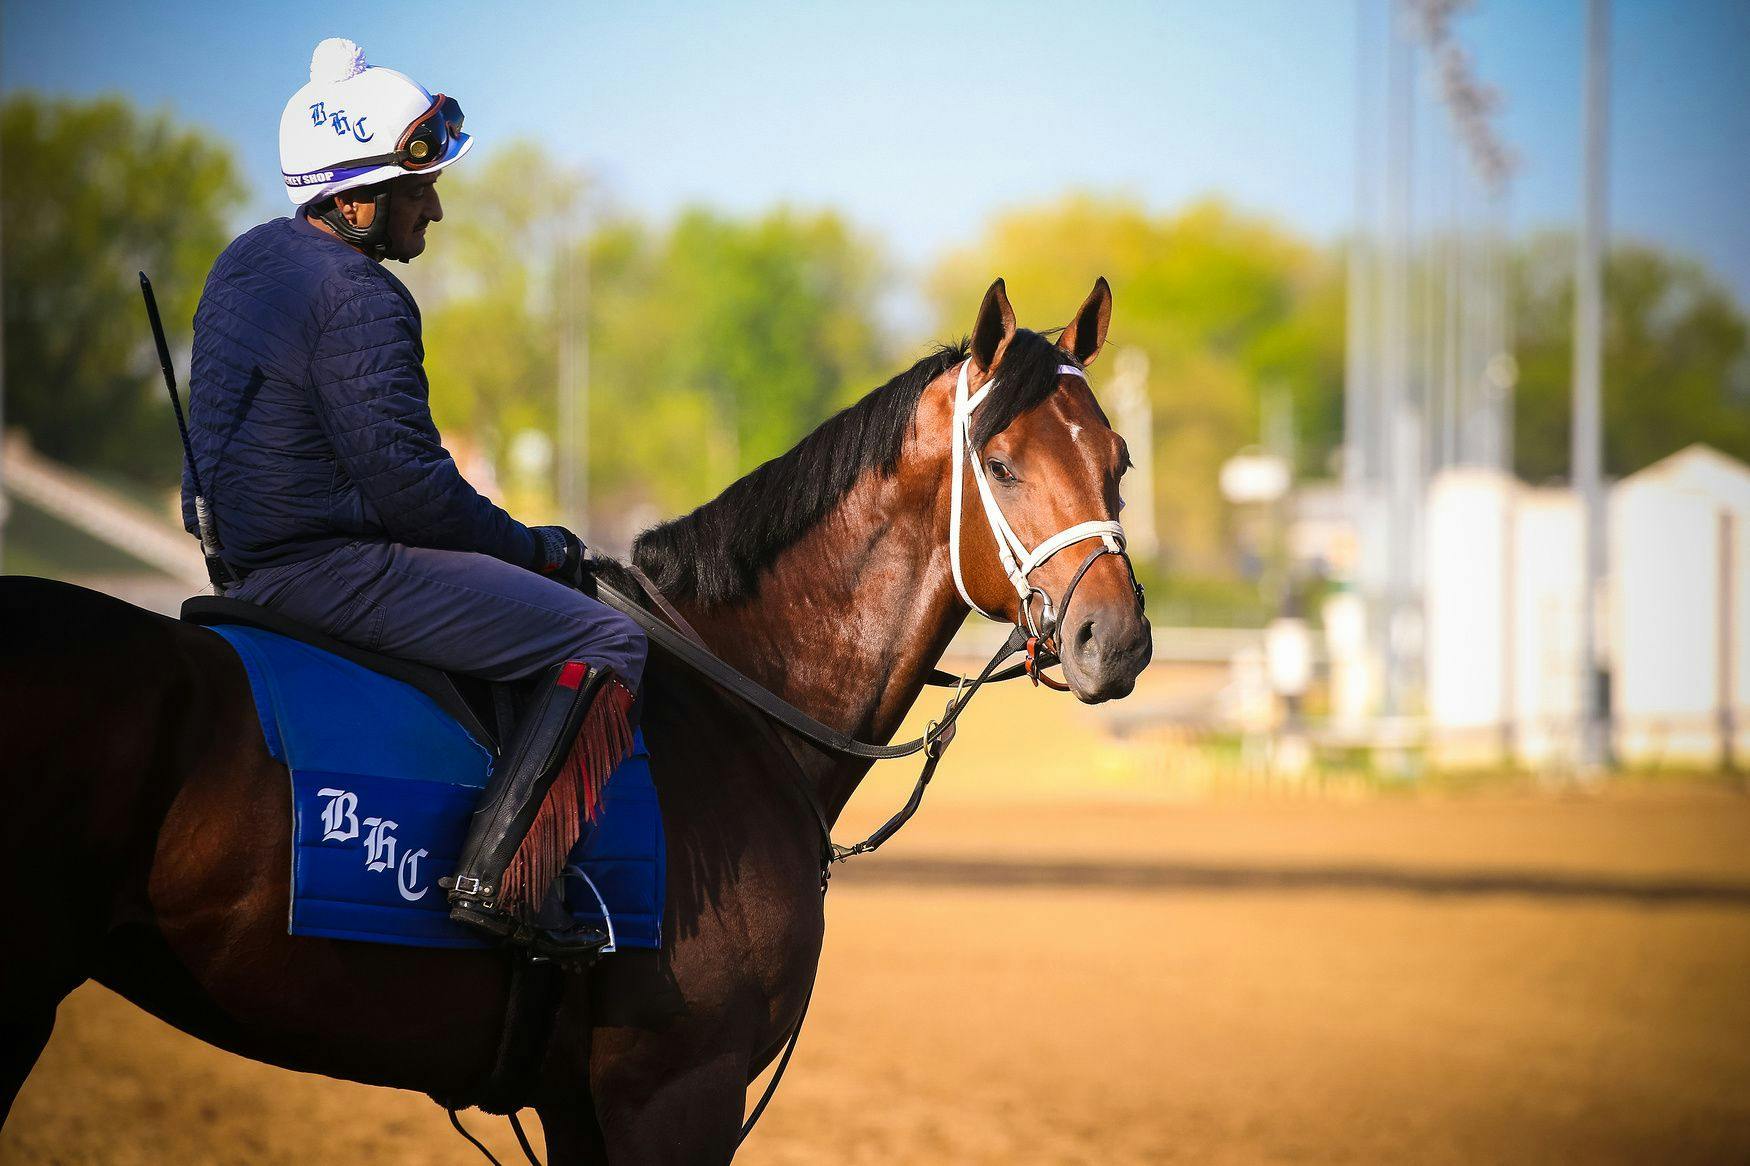 Dosage Index, foaling dates for 2023 Kentucky Derby contende TwinSpires